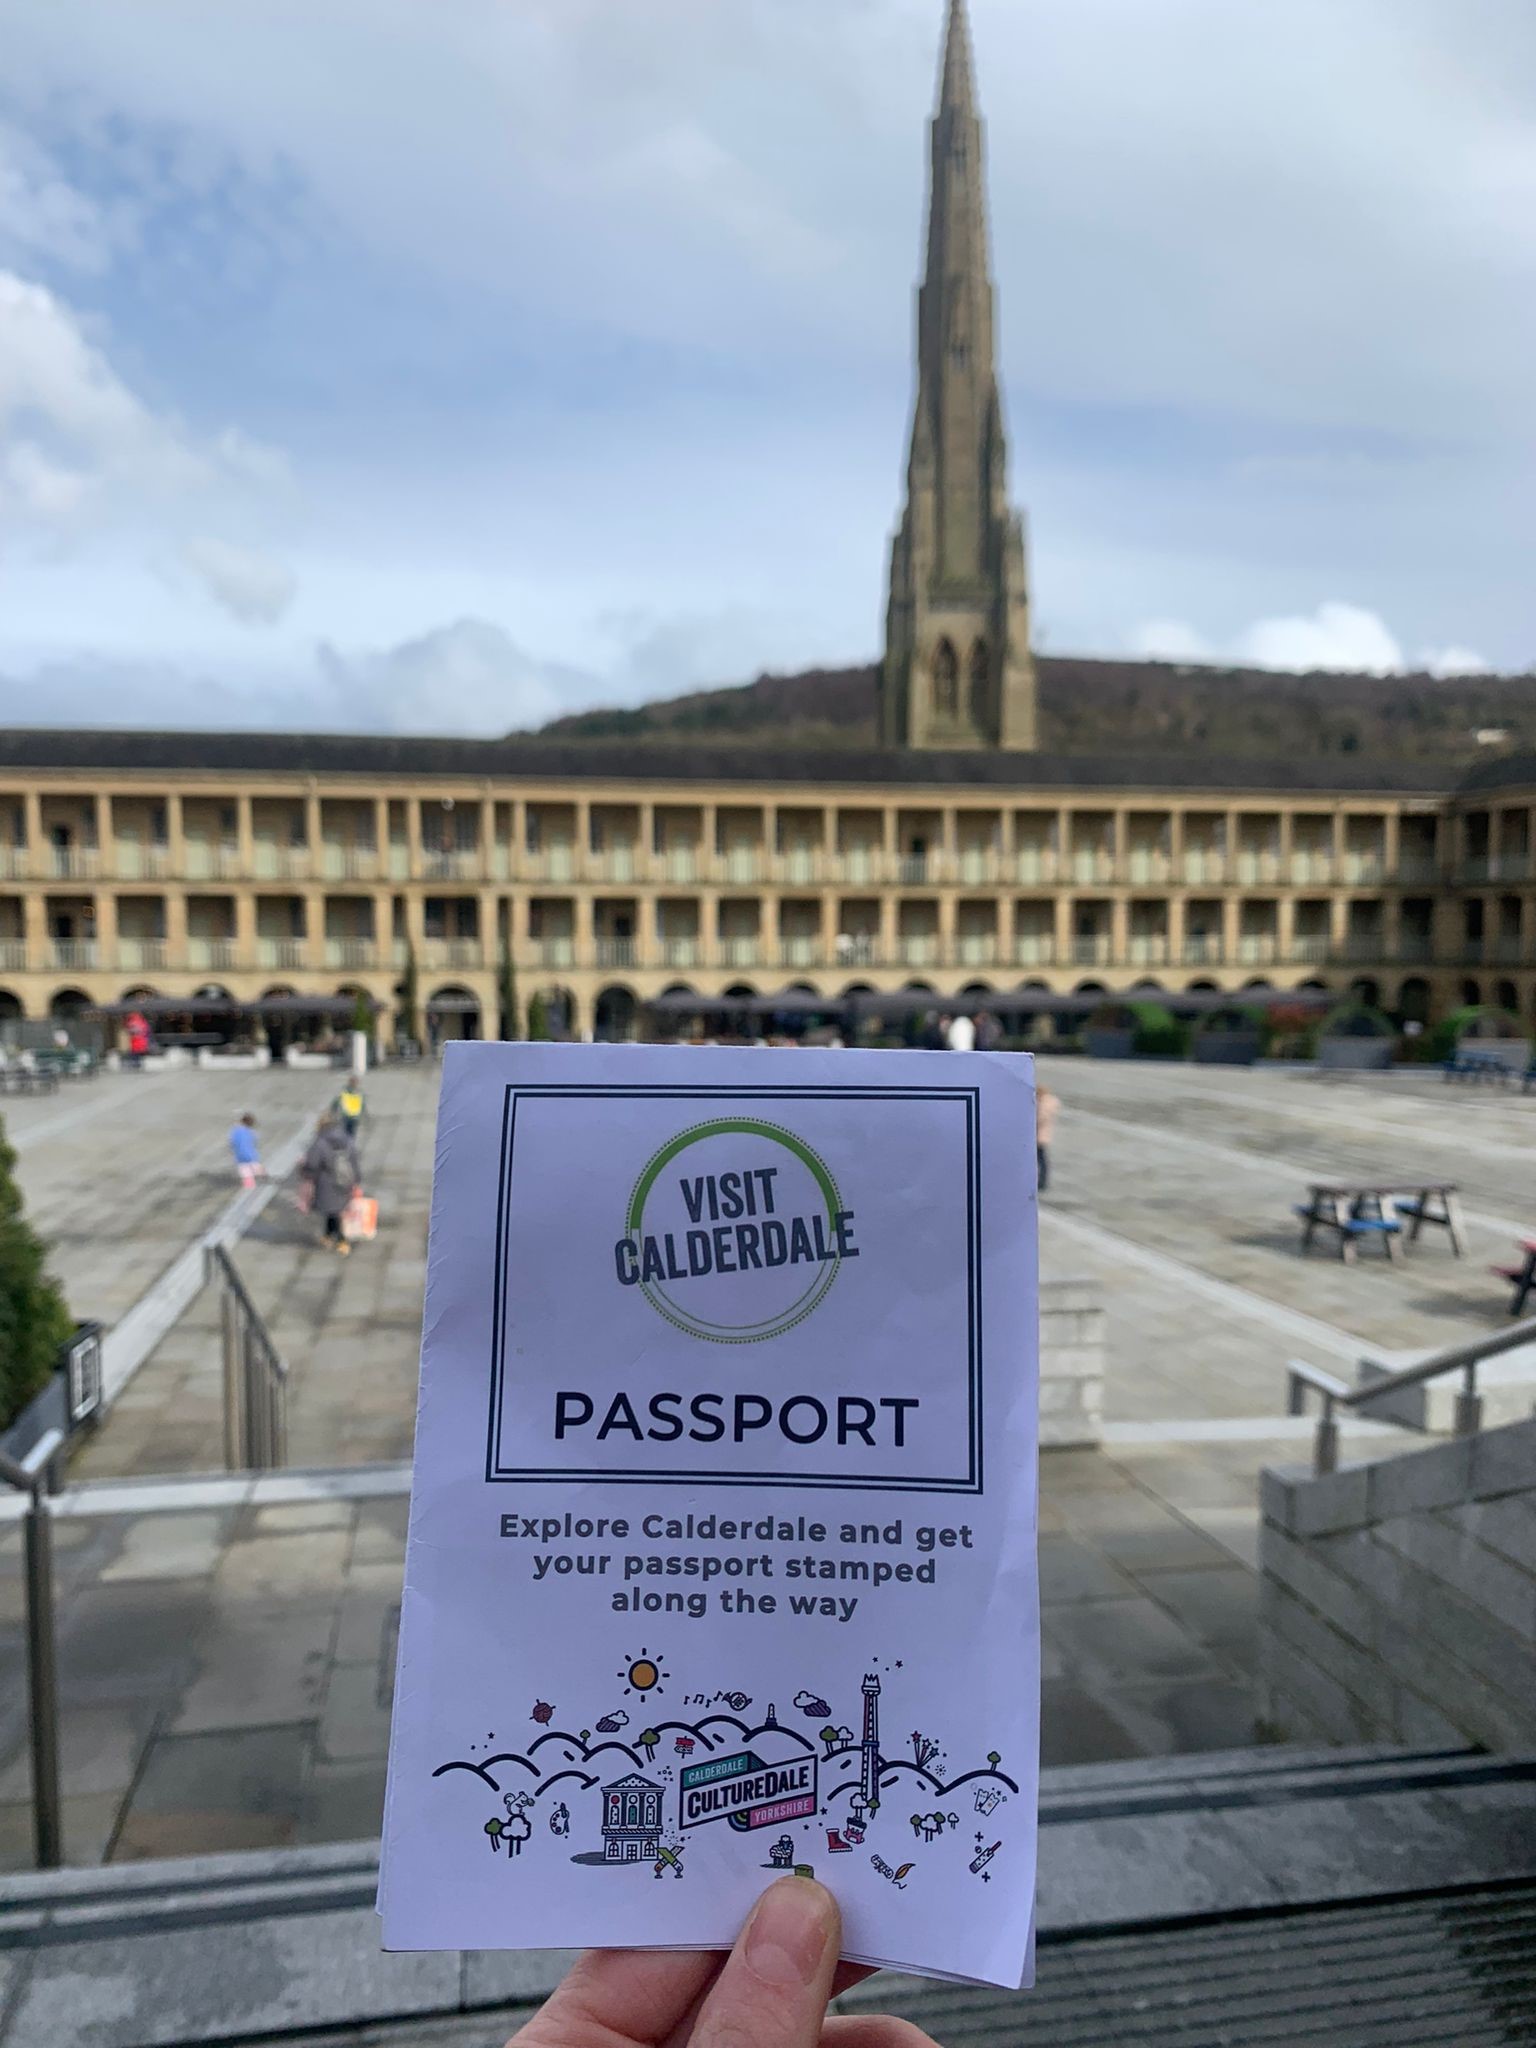 Image of the Calderdale passport booklet in the Piece Hall